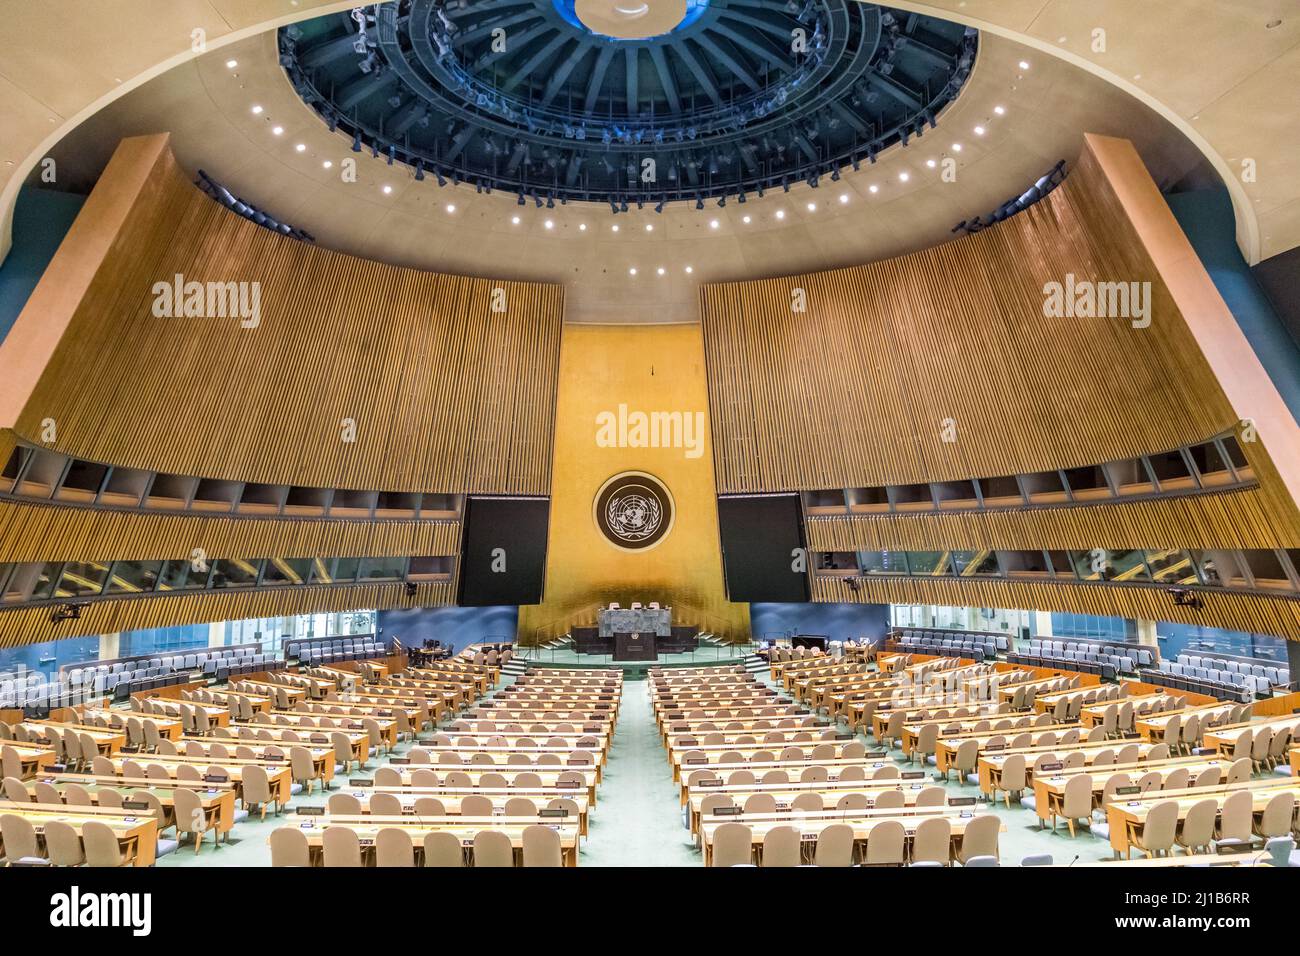 GENERAL ASSEMBLY HALL IN THE UNITED NATIONS ORGANIZATION HEADQUARTERS IN NEW YORK, PEACE IN THE WORLD, UNO, MIDTOWN MANHATTAN, NEW YORK CITY, NEW YORK, USA Stock Photo